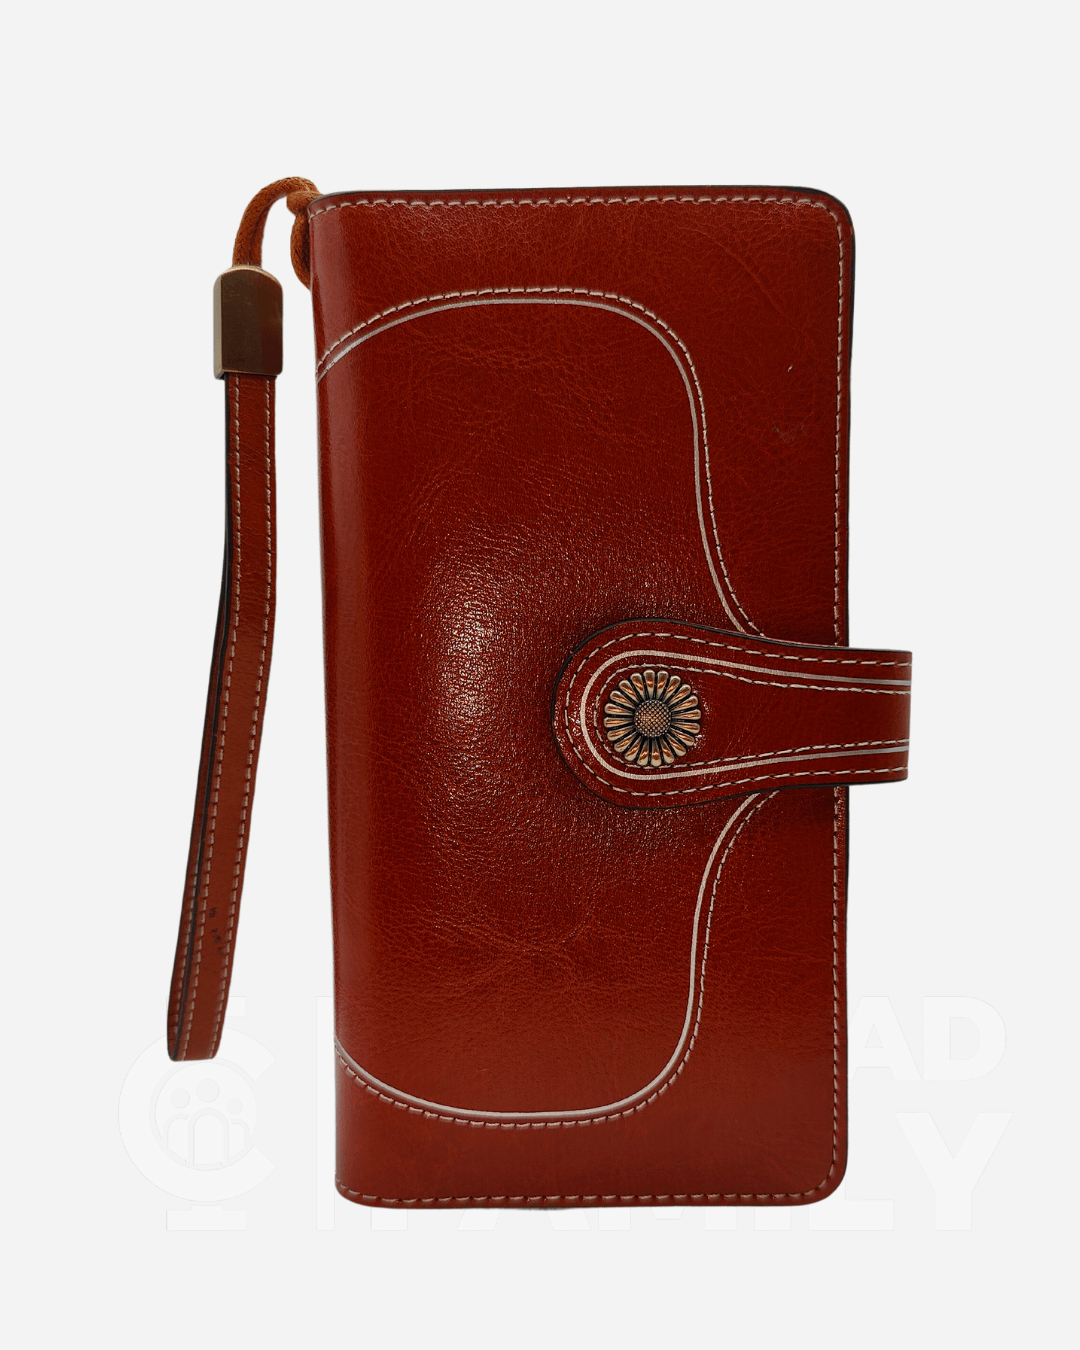 Red RFID blocking brown leather wallet with a zipper